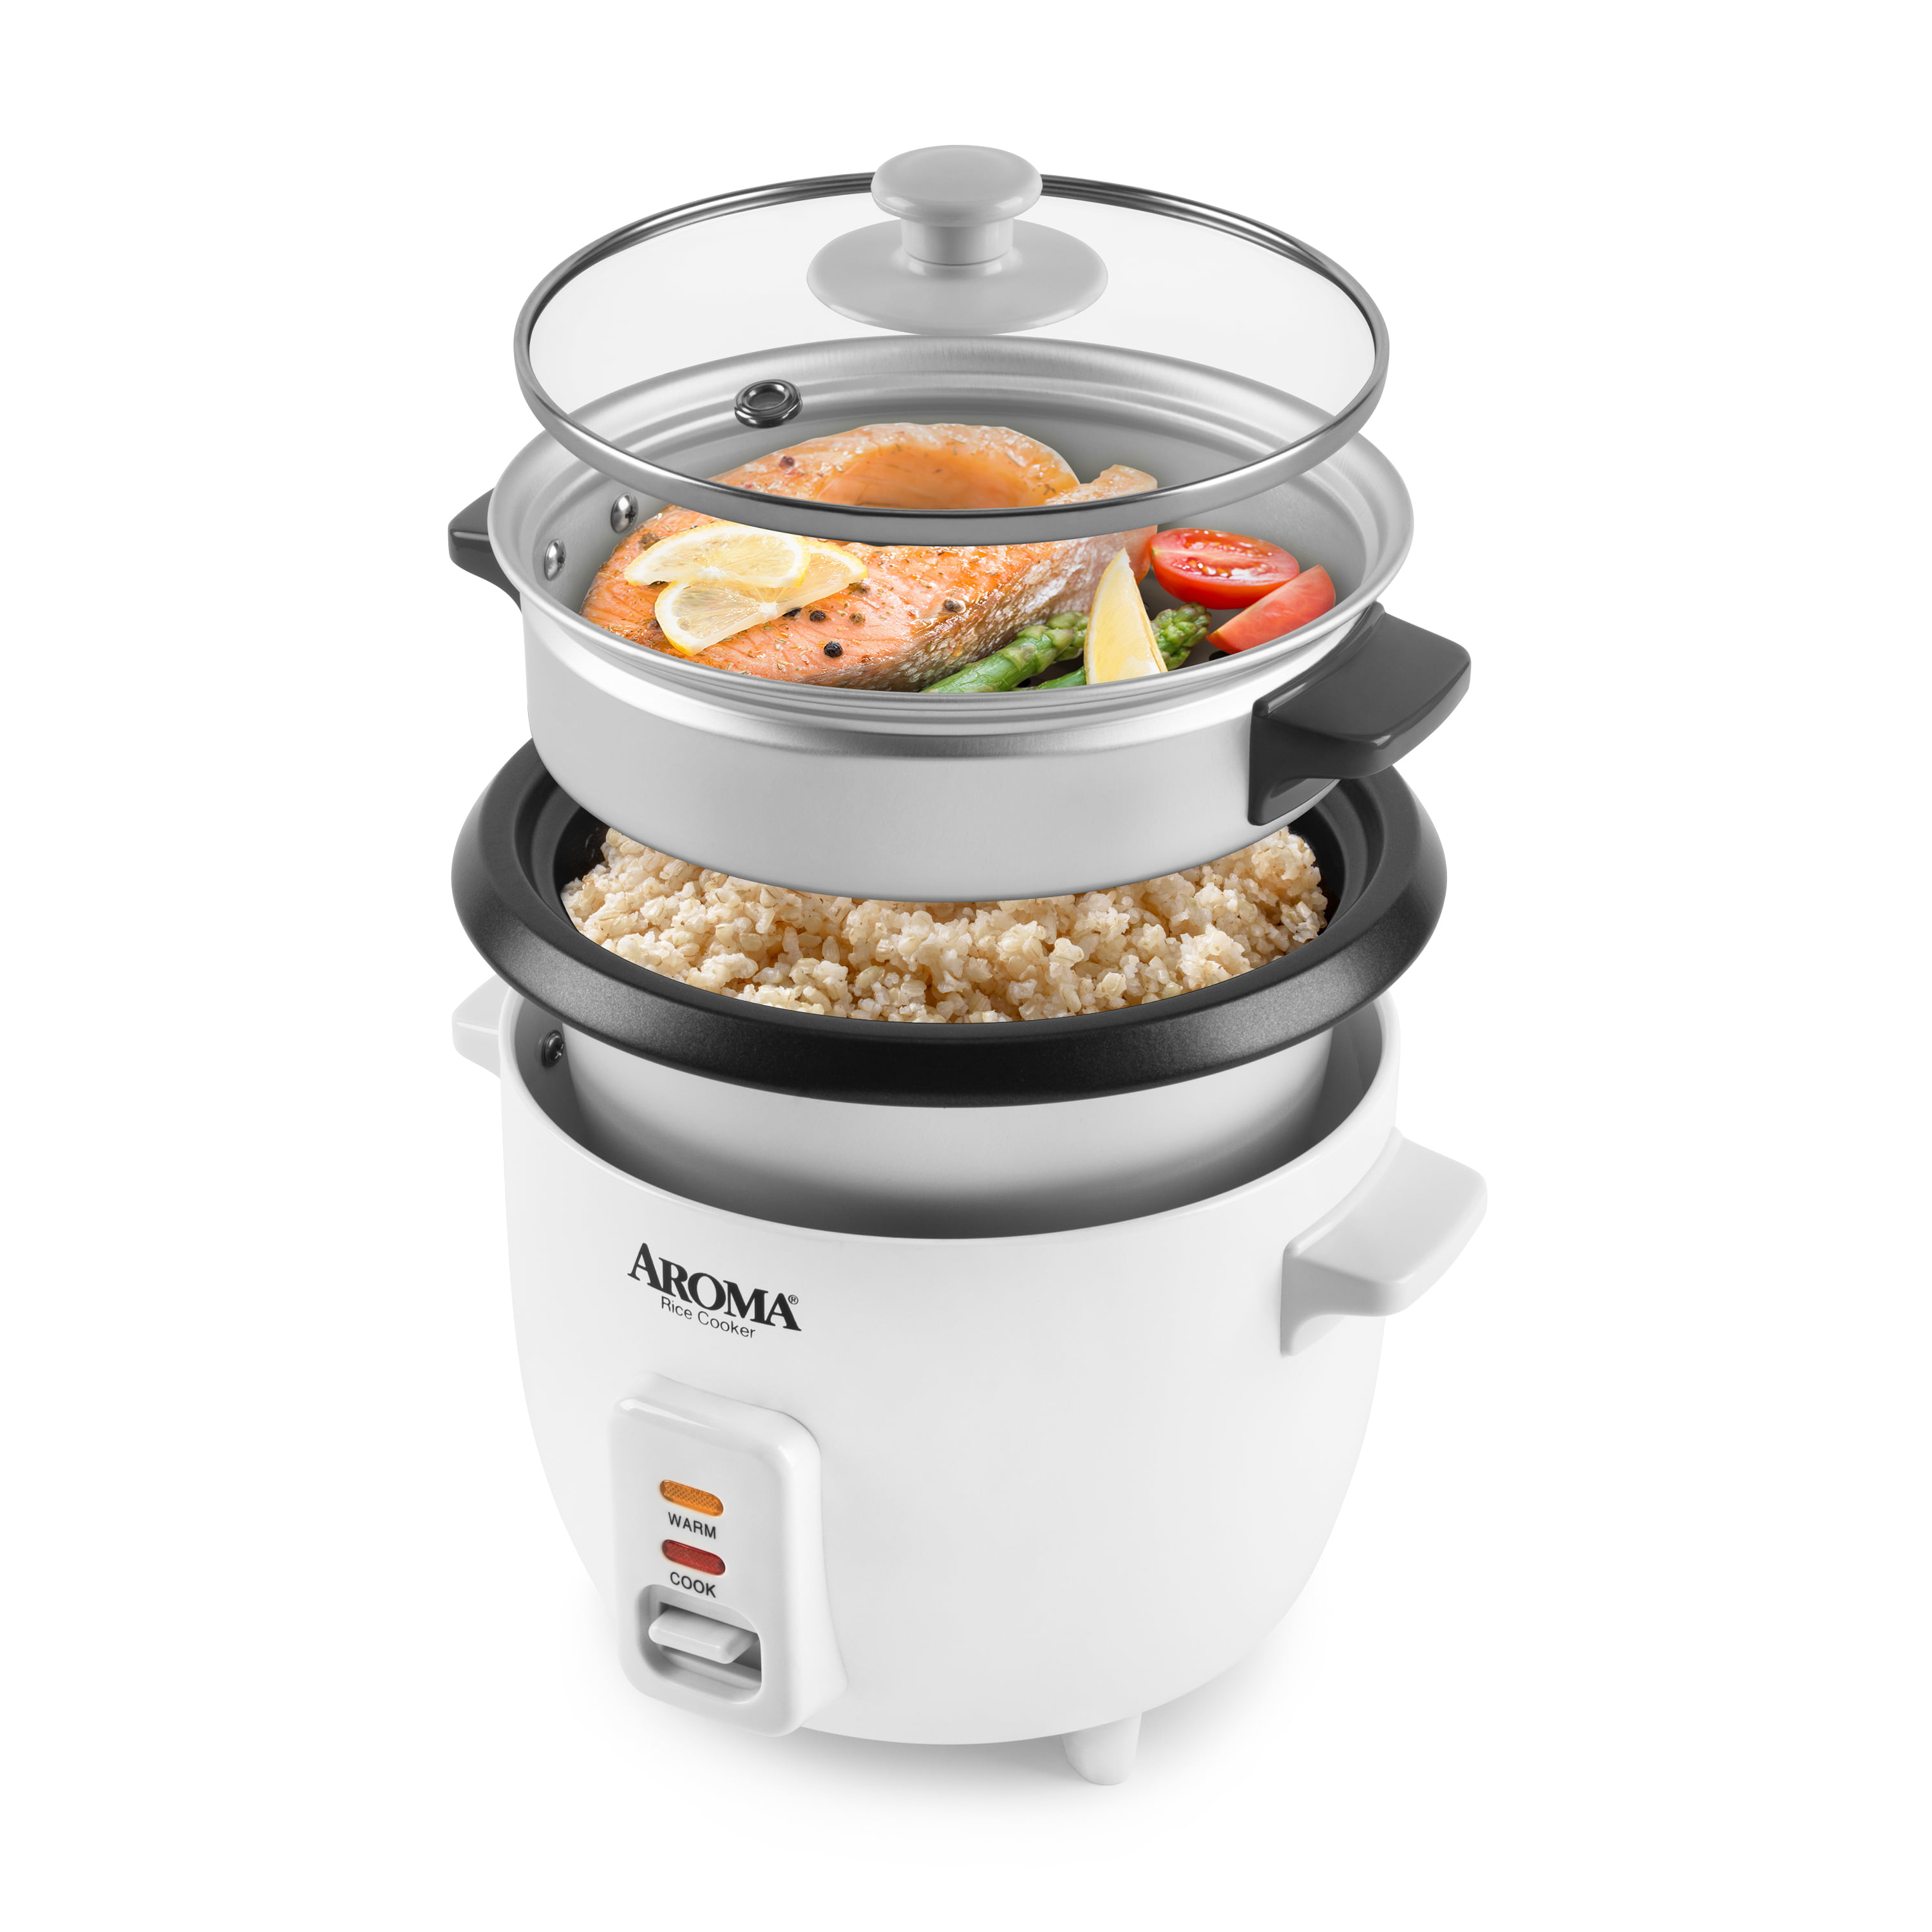 Aroma 6 cups Rice Cooker - Total Qty: 1, Count of: 1 - Mariano's